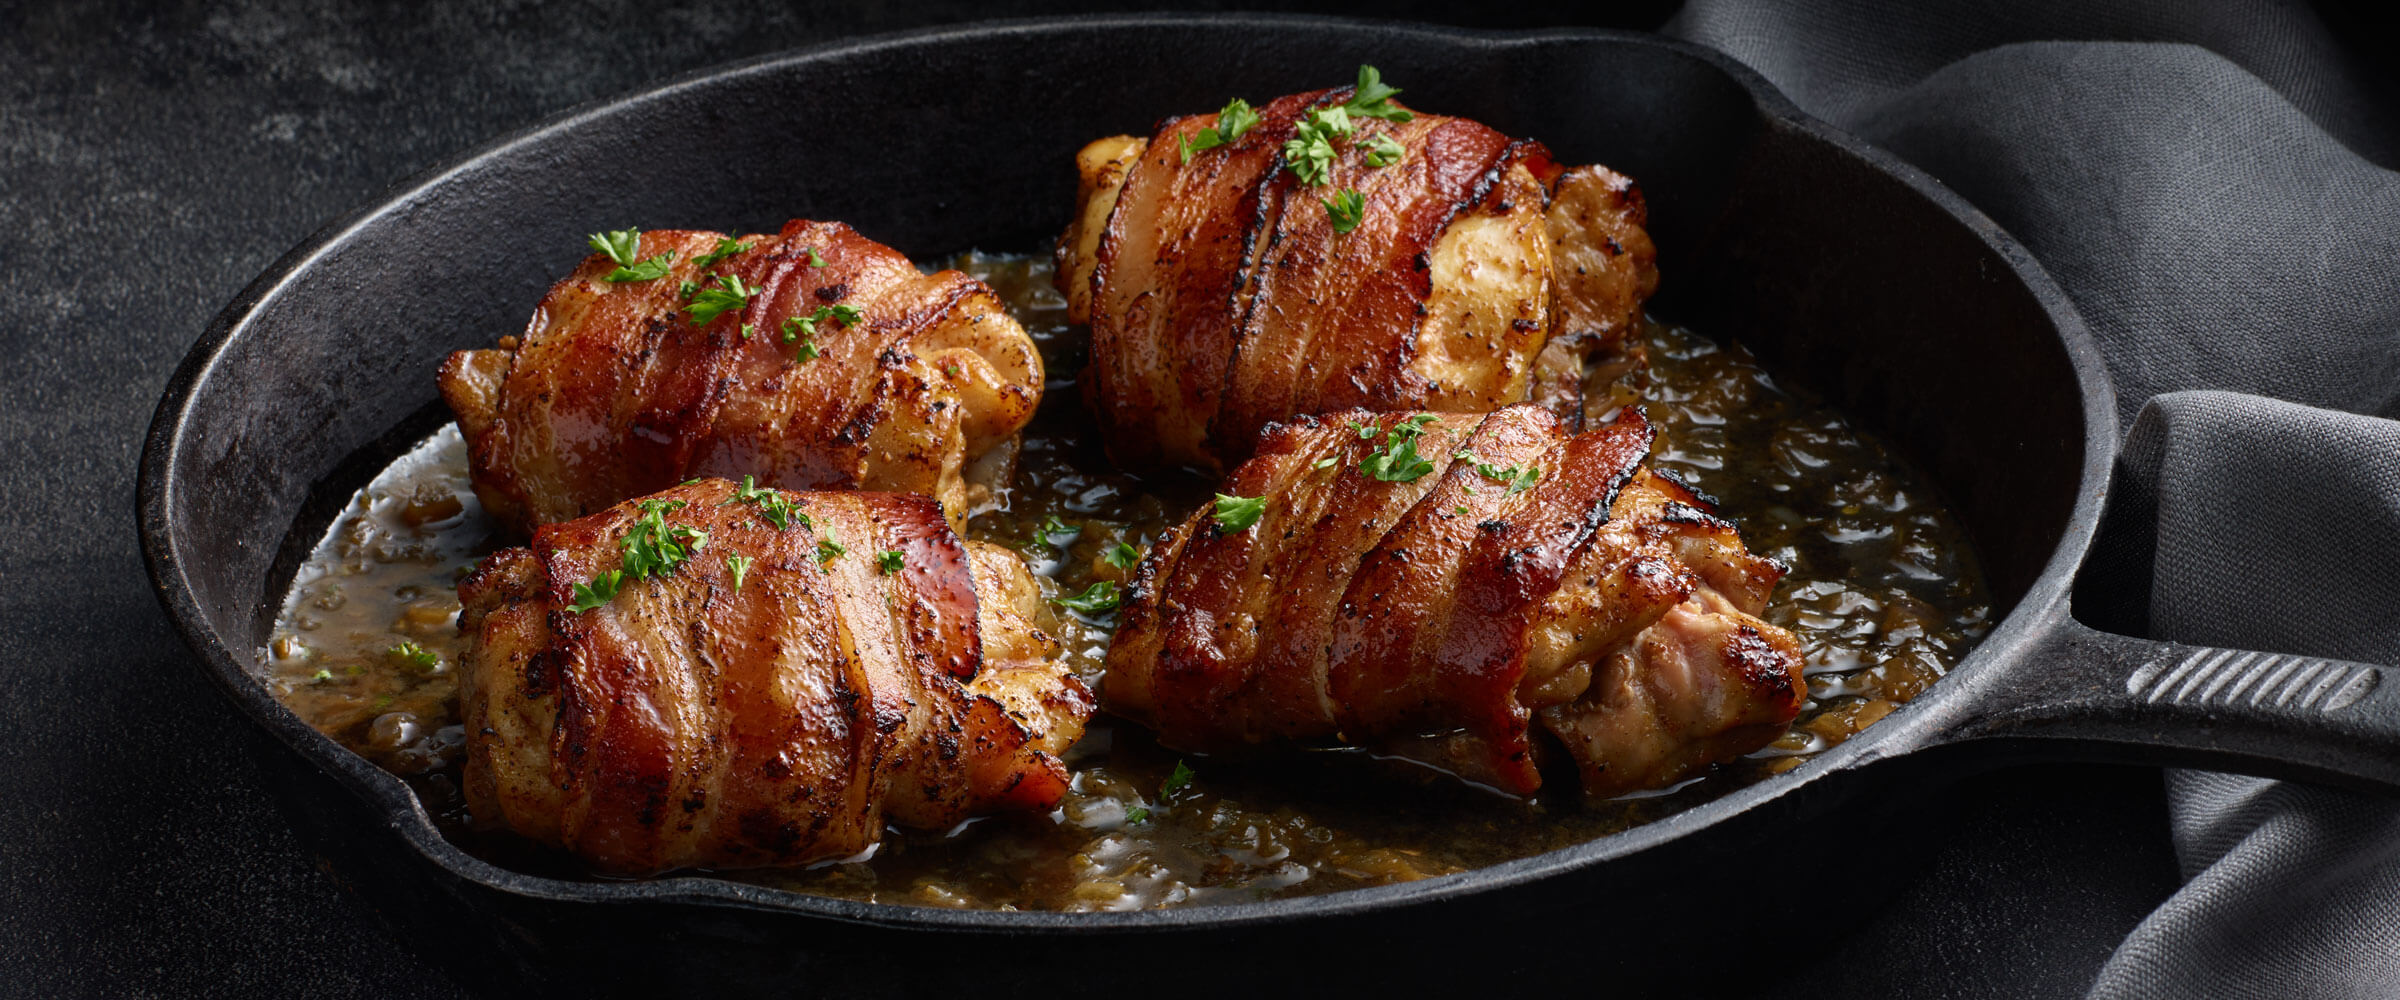 Apple Cider Bacon-Wrapped Chicken Thighs in cast iron skillet